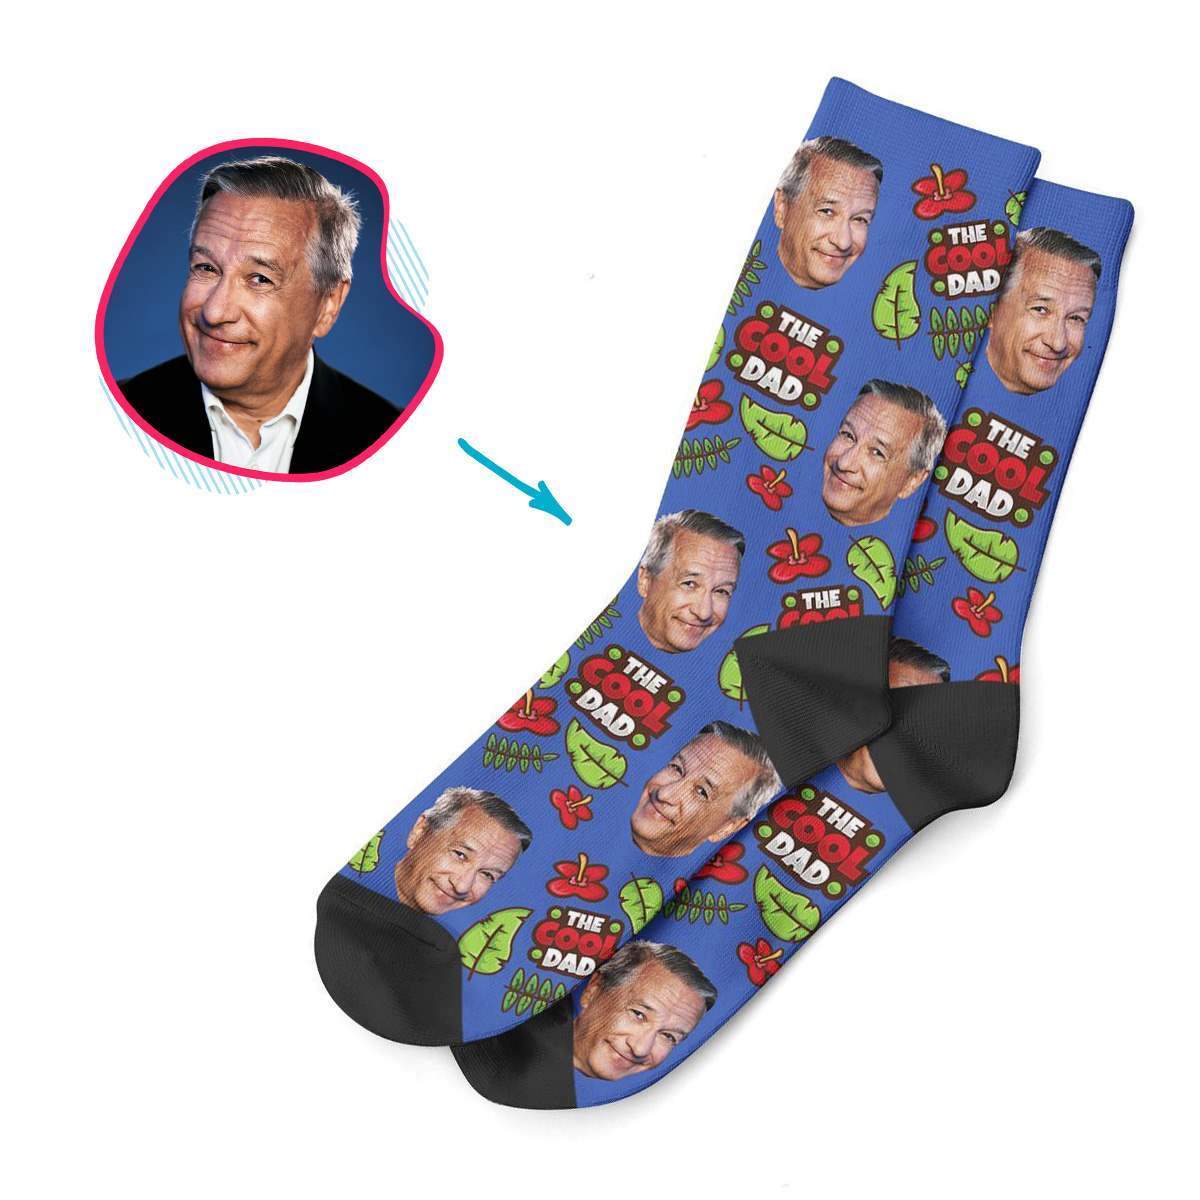 darkblue The Cool Dad socks personalized with photo of face printed on them